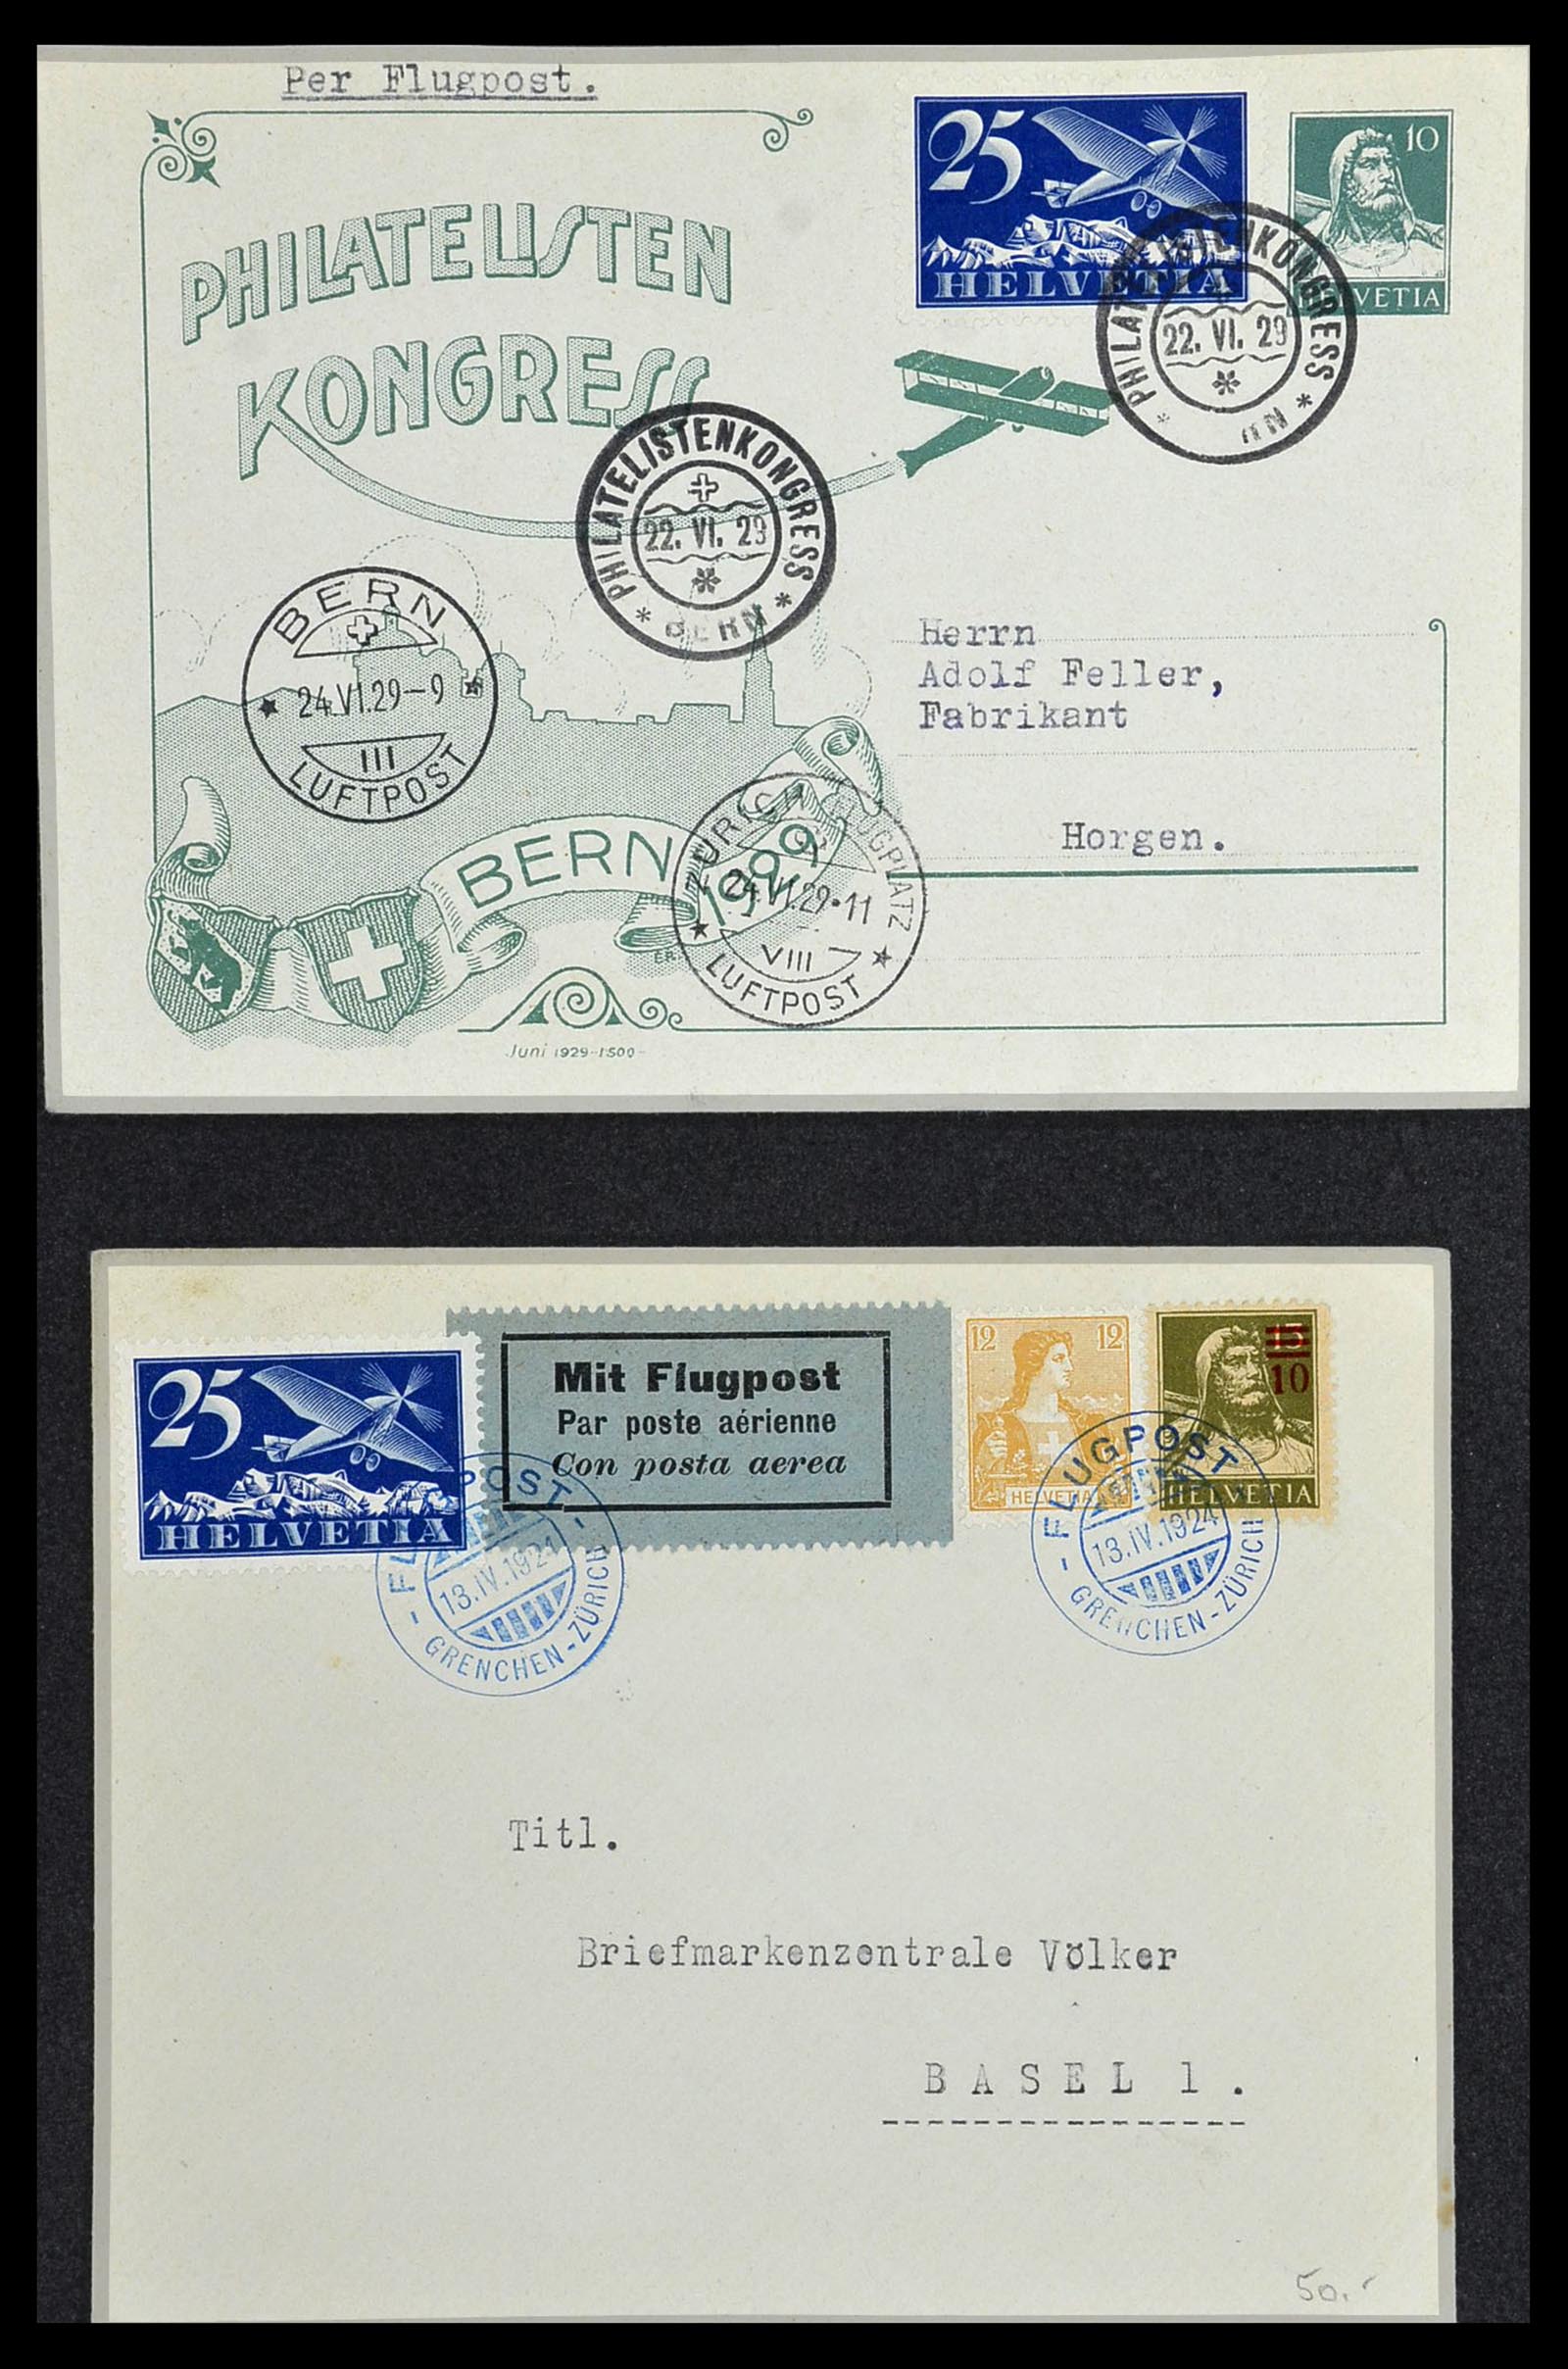 34141 096 - Stamp collection 34141 Switzerland airmail covers 1920-1960.